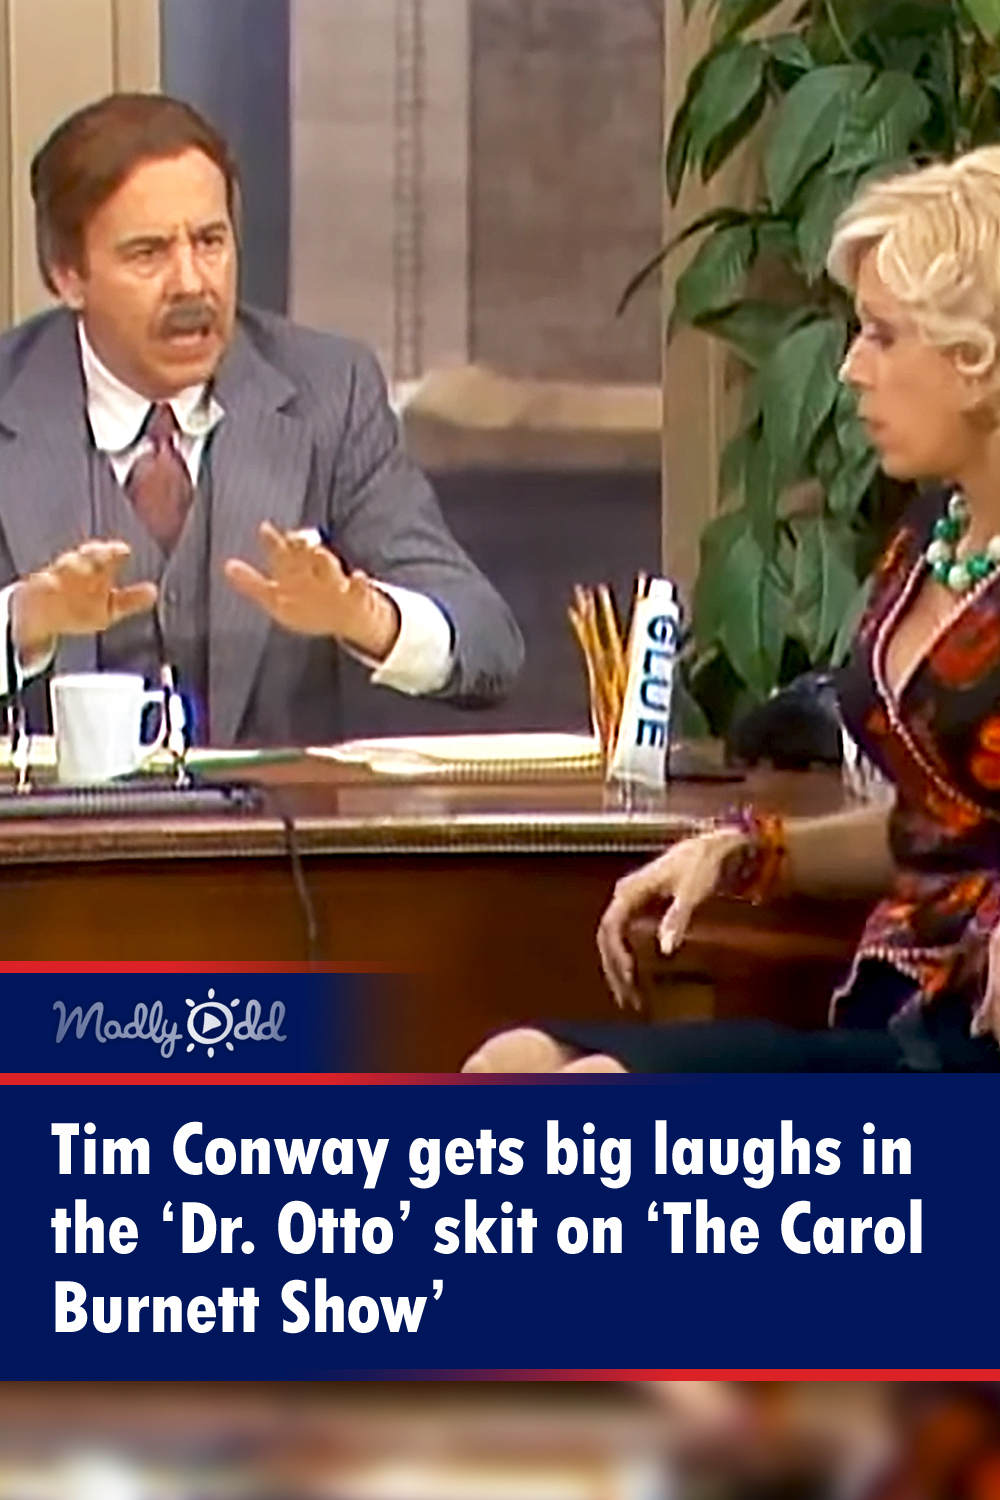 Tim Conway gets big laughs in the ‘Dr. Otto’ skit on ‘The Carol Burnett Show’